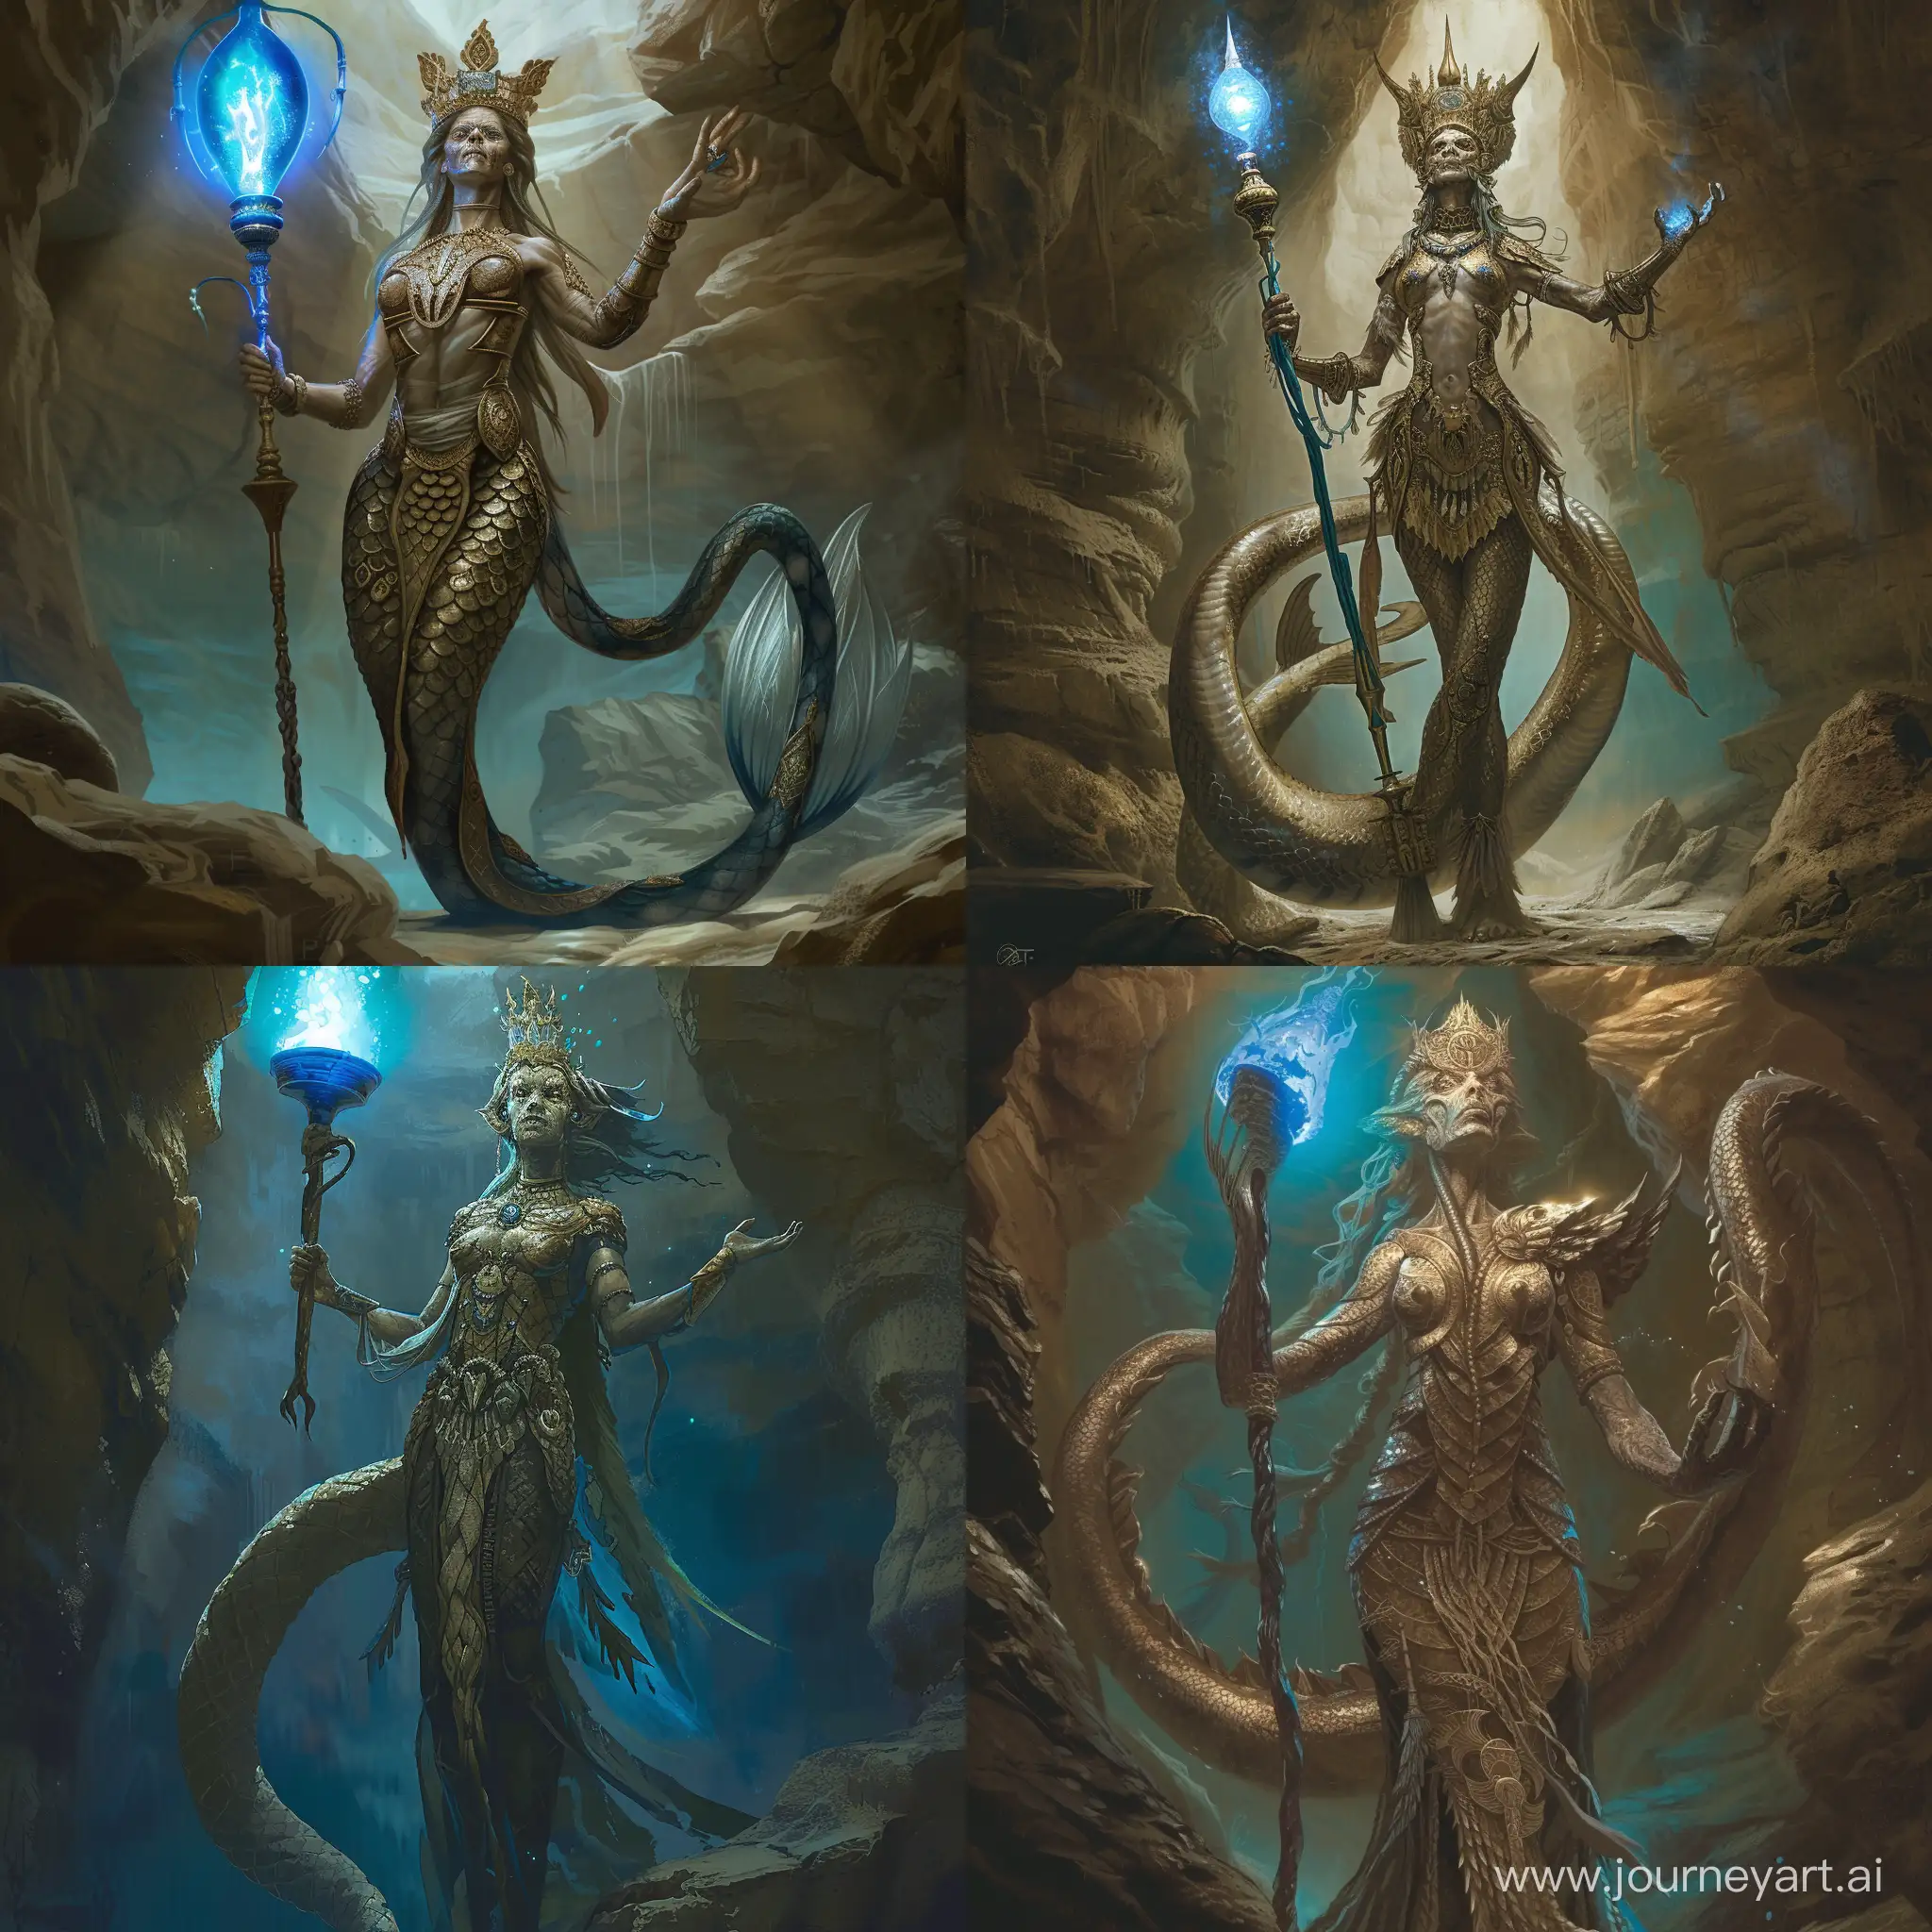 a serpentine siren holding a blue glowing lamp staff. she is in a cavern standing upright. She has two arms, no legs and is held upright by her thick mermaid-style tail. She is richly decorated in ceremonial robes with a strange crown. She has long hair.